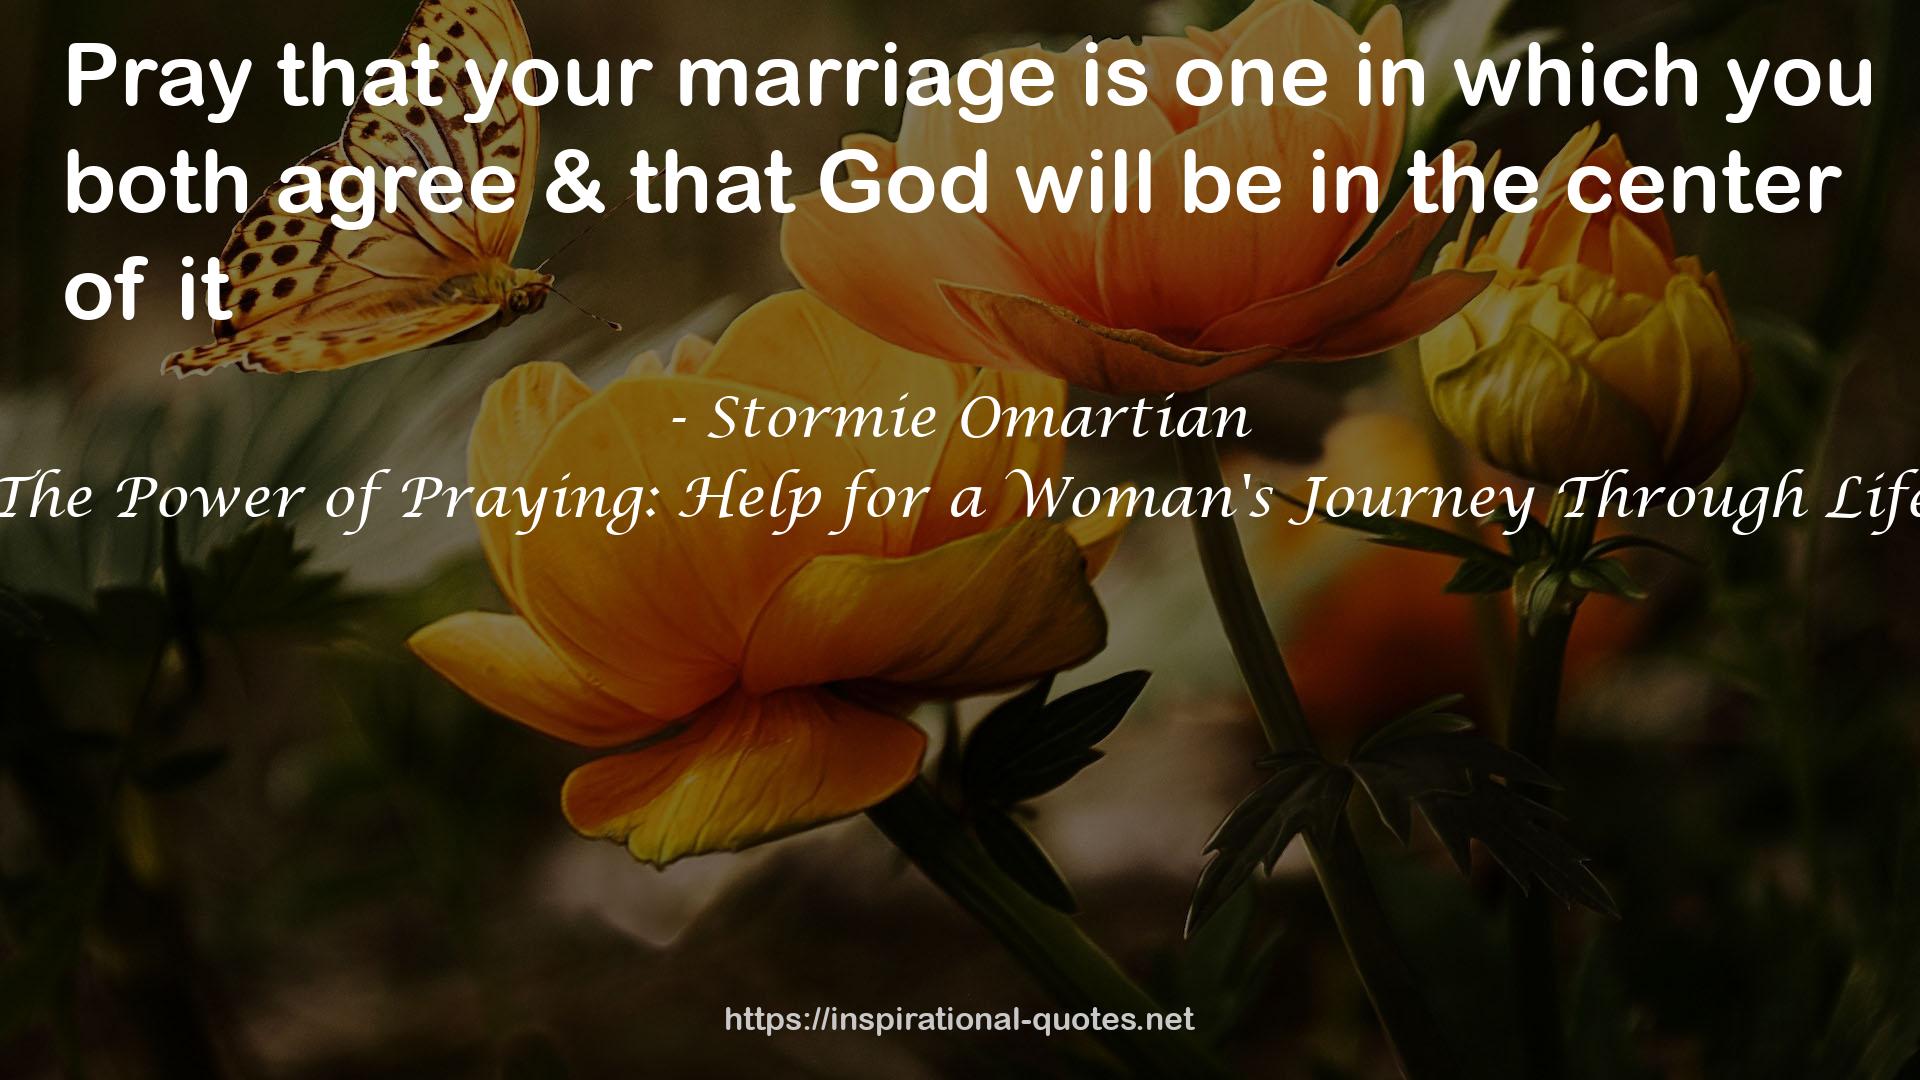 The Power of Praying: Help for a Woman's Journey Through Life QUOTES